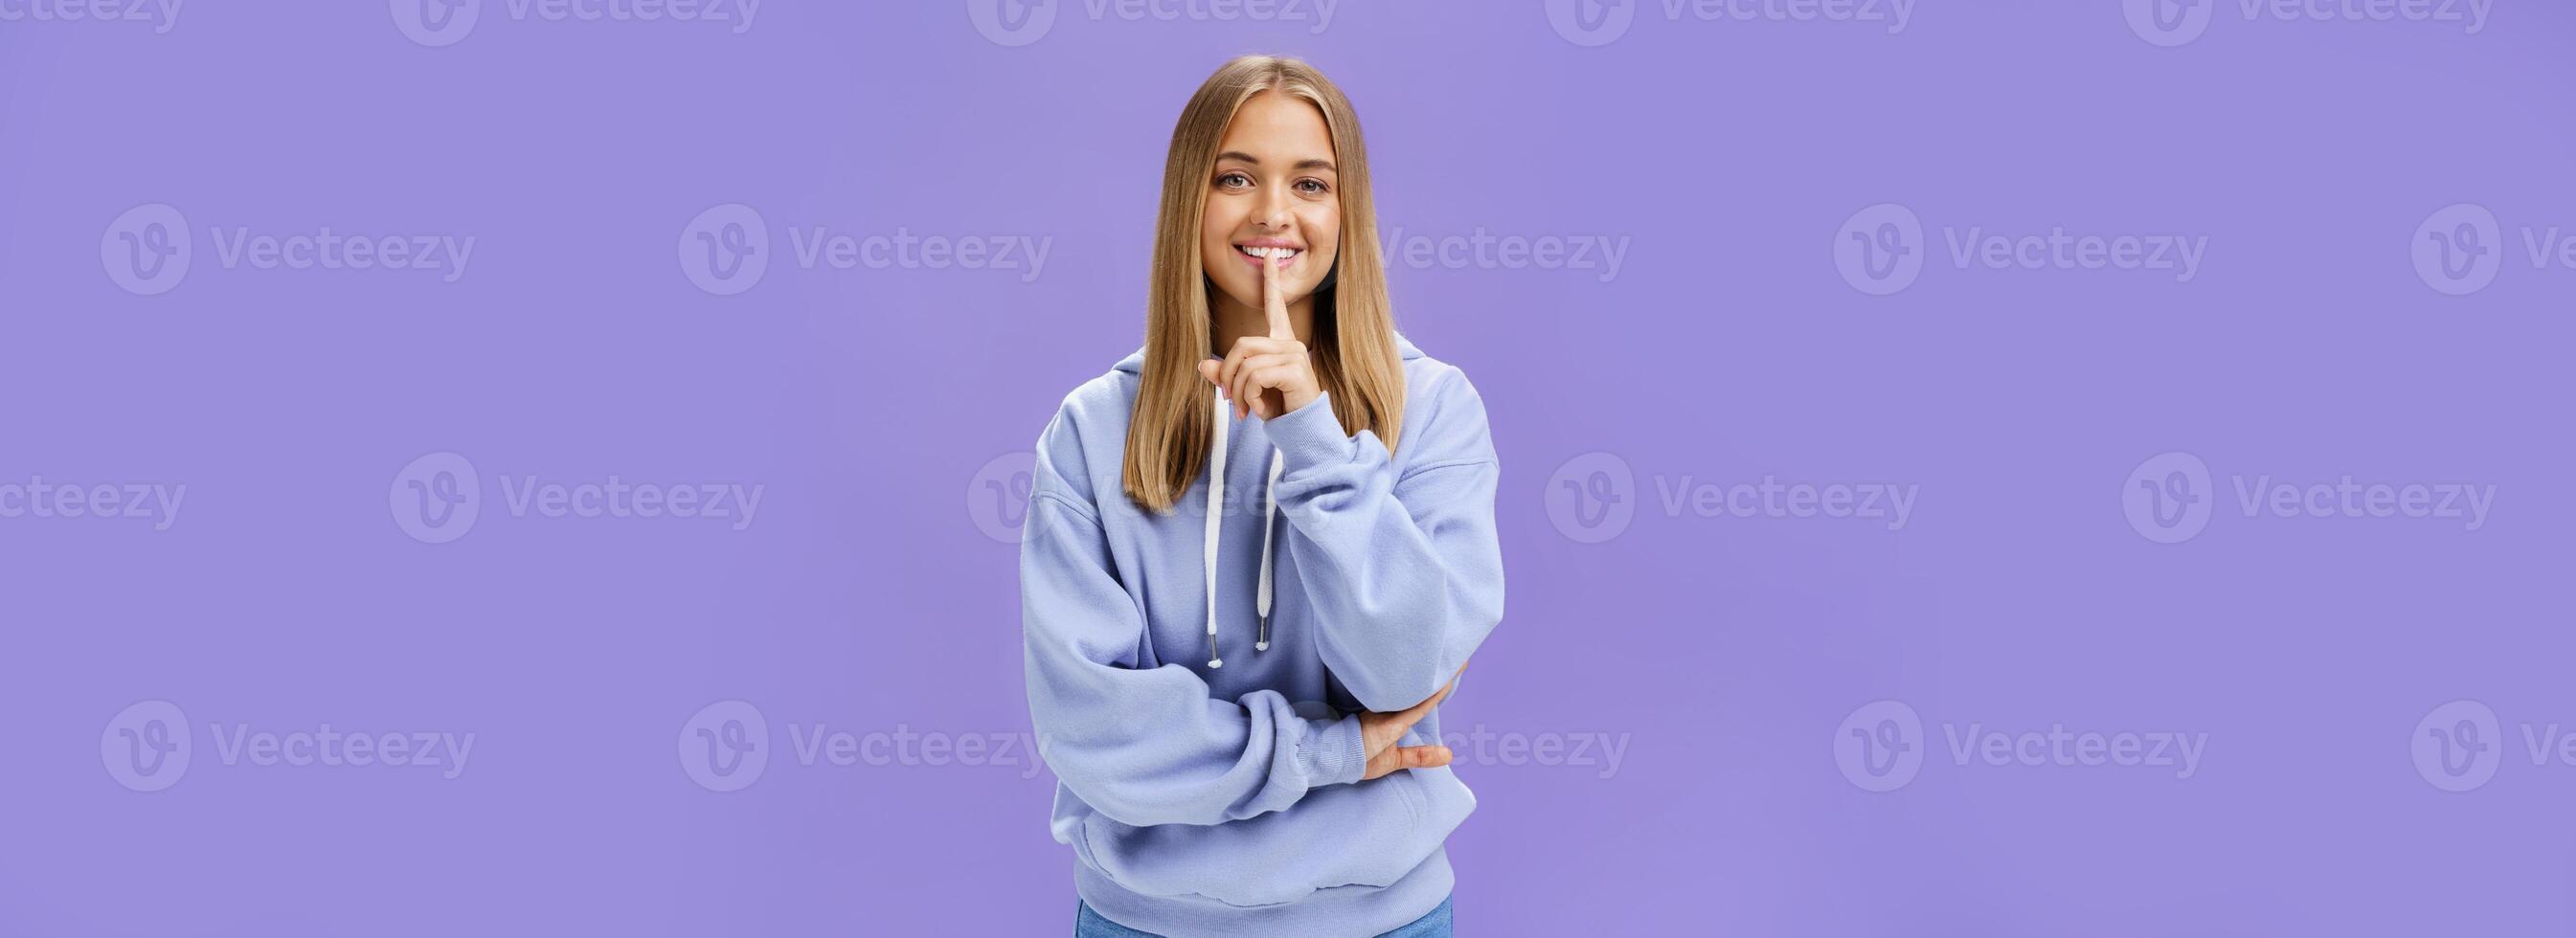 Portrait of joyful cute feminine young woman in hoodie smiling happily showing shush gesture hiding surprise asking keep secret standing amused and carefree against purple background photo